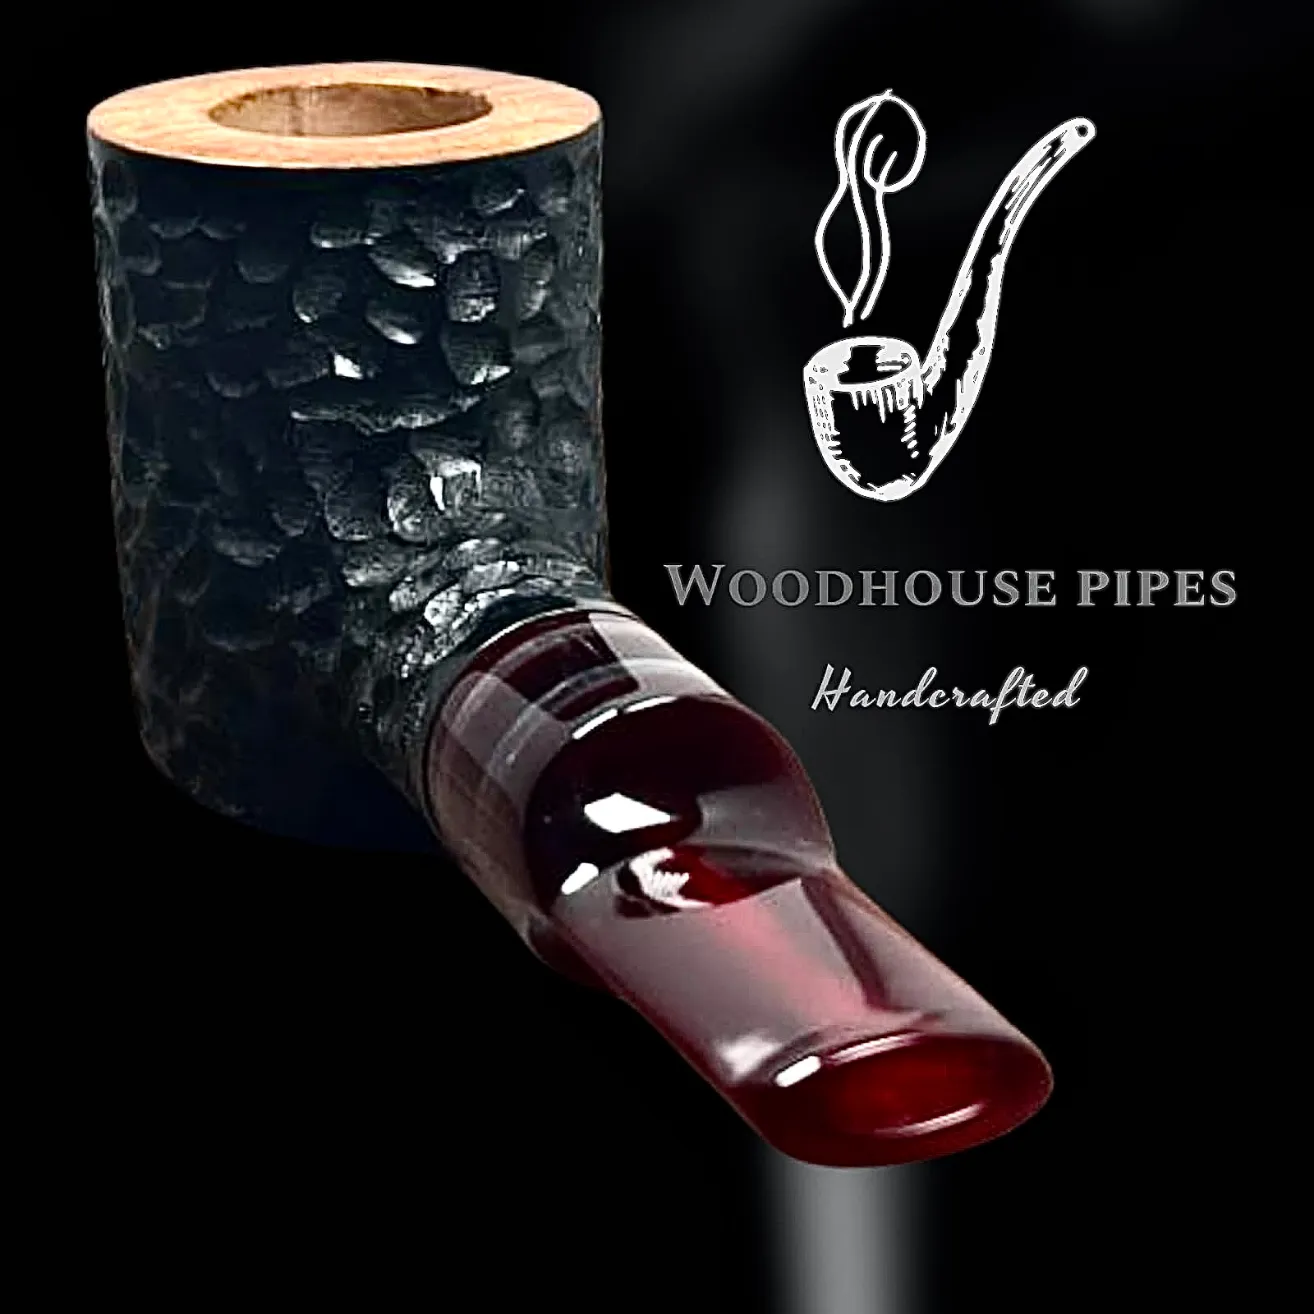 Handmade Tobacco Pipe - WOODHOUSE PIPES Handcrafted - Photo Number 0176